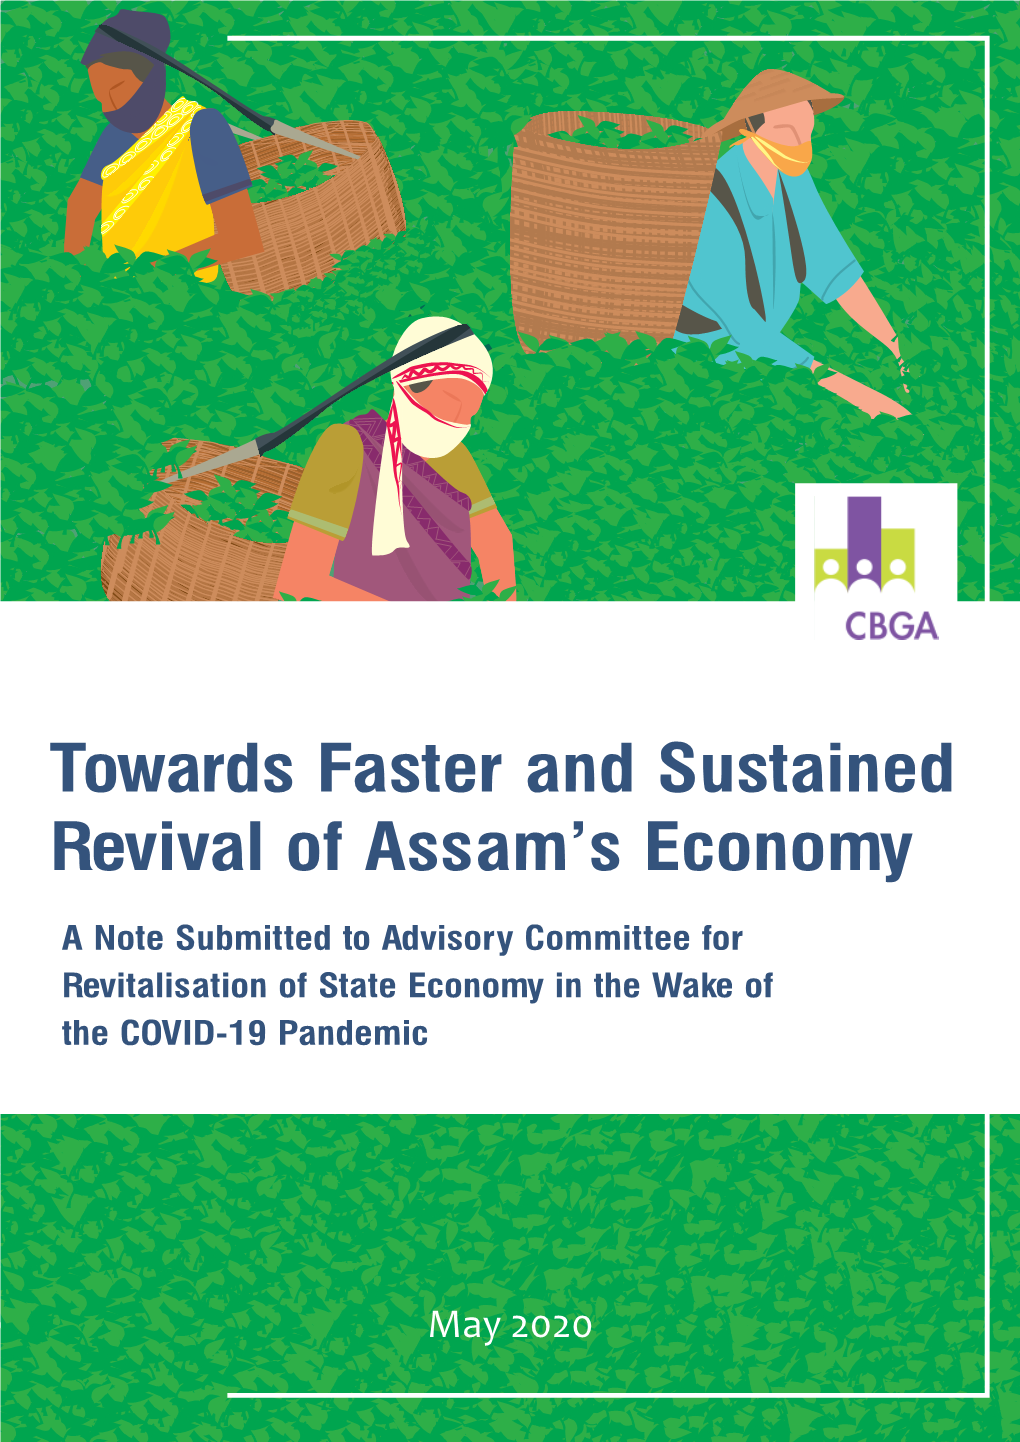 Towards Faster and Sustained Revival of Assam's Economy